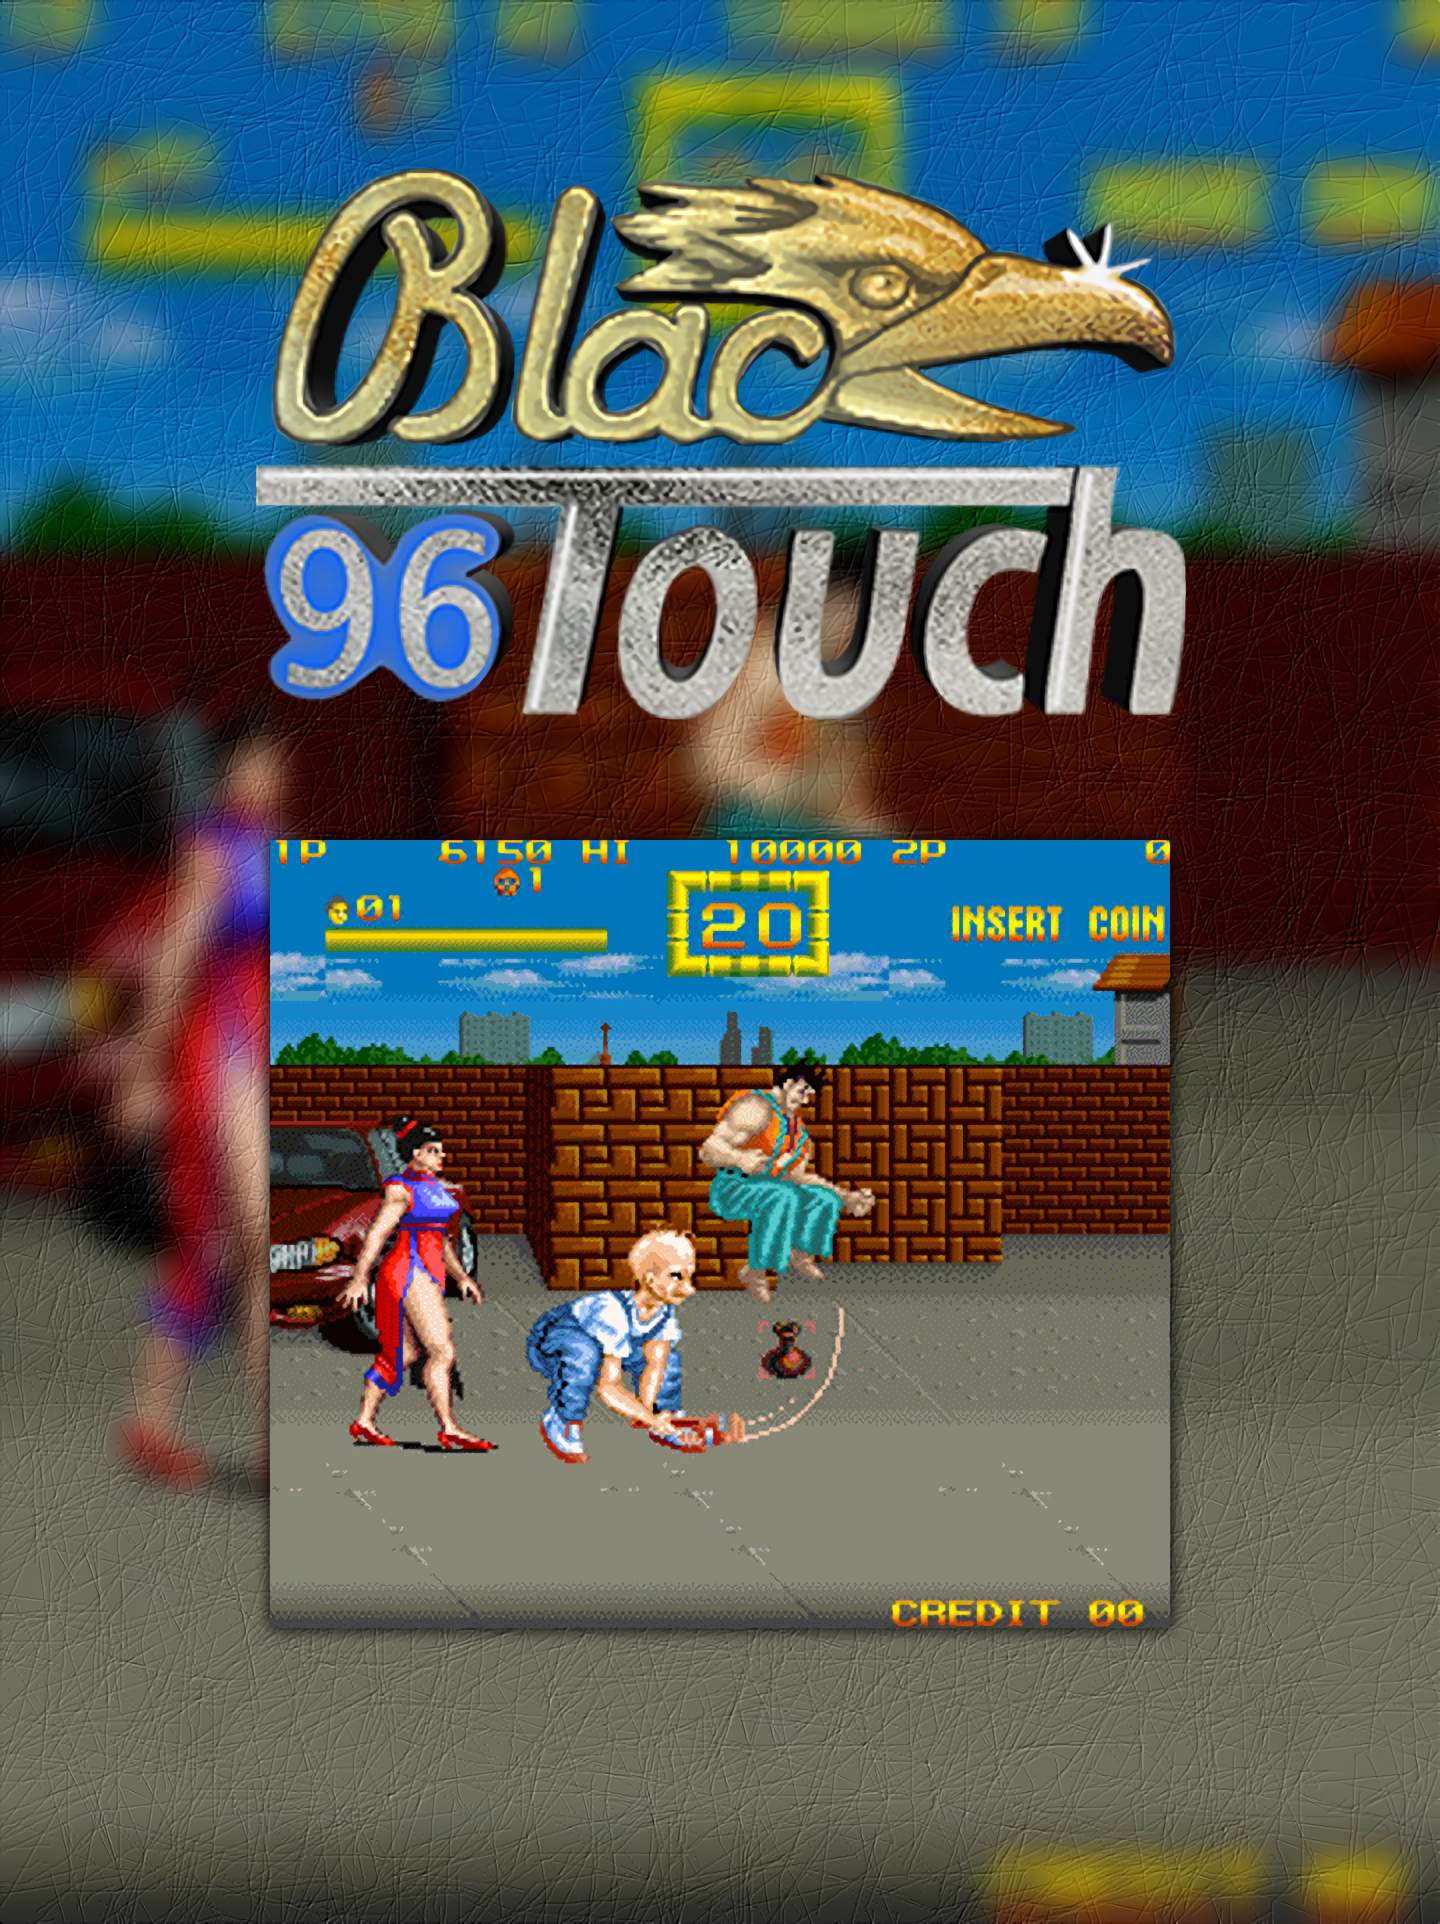 Black Touch '96